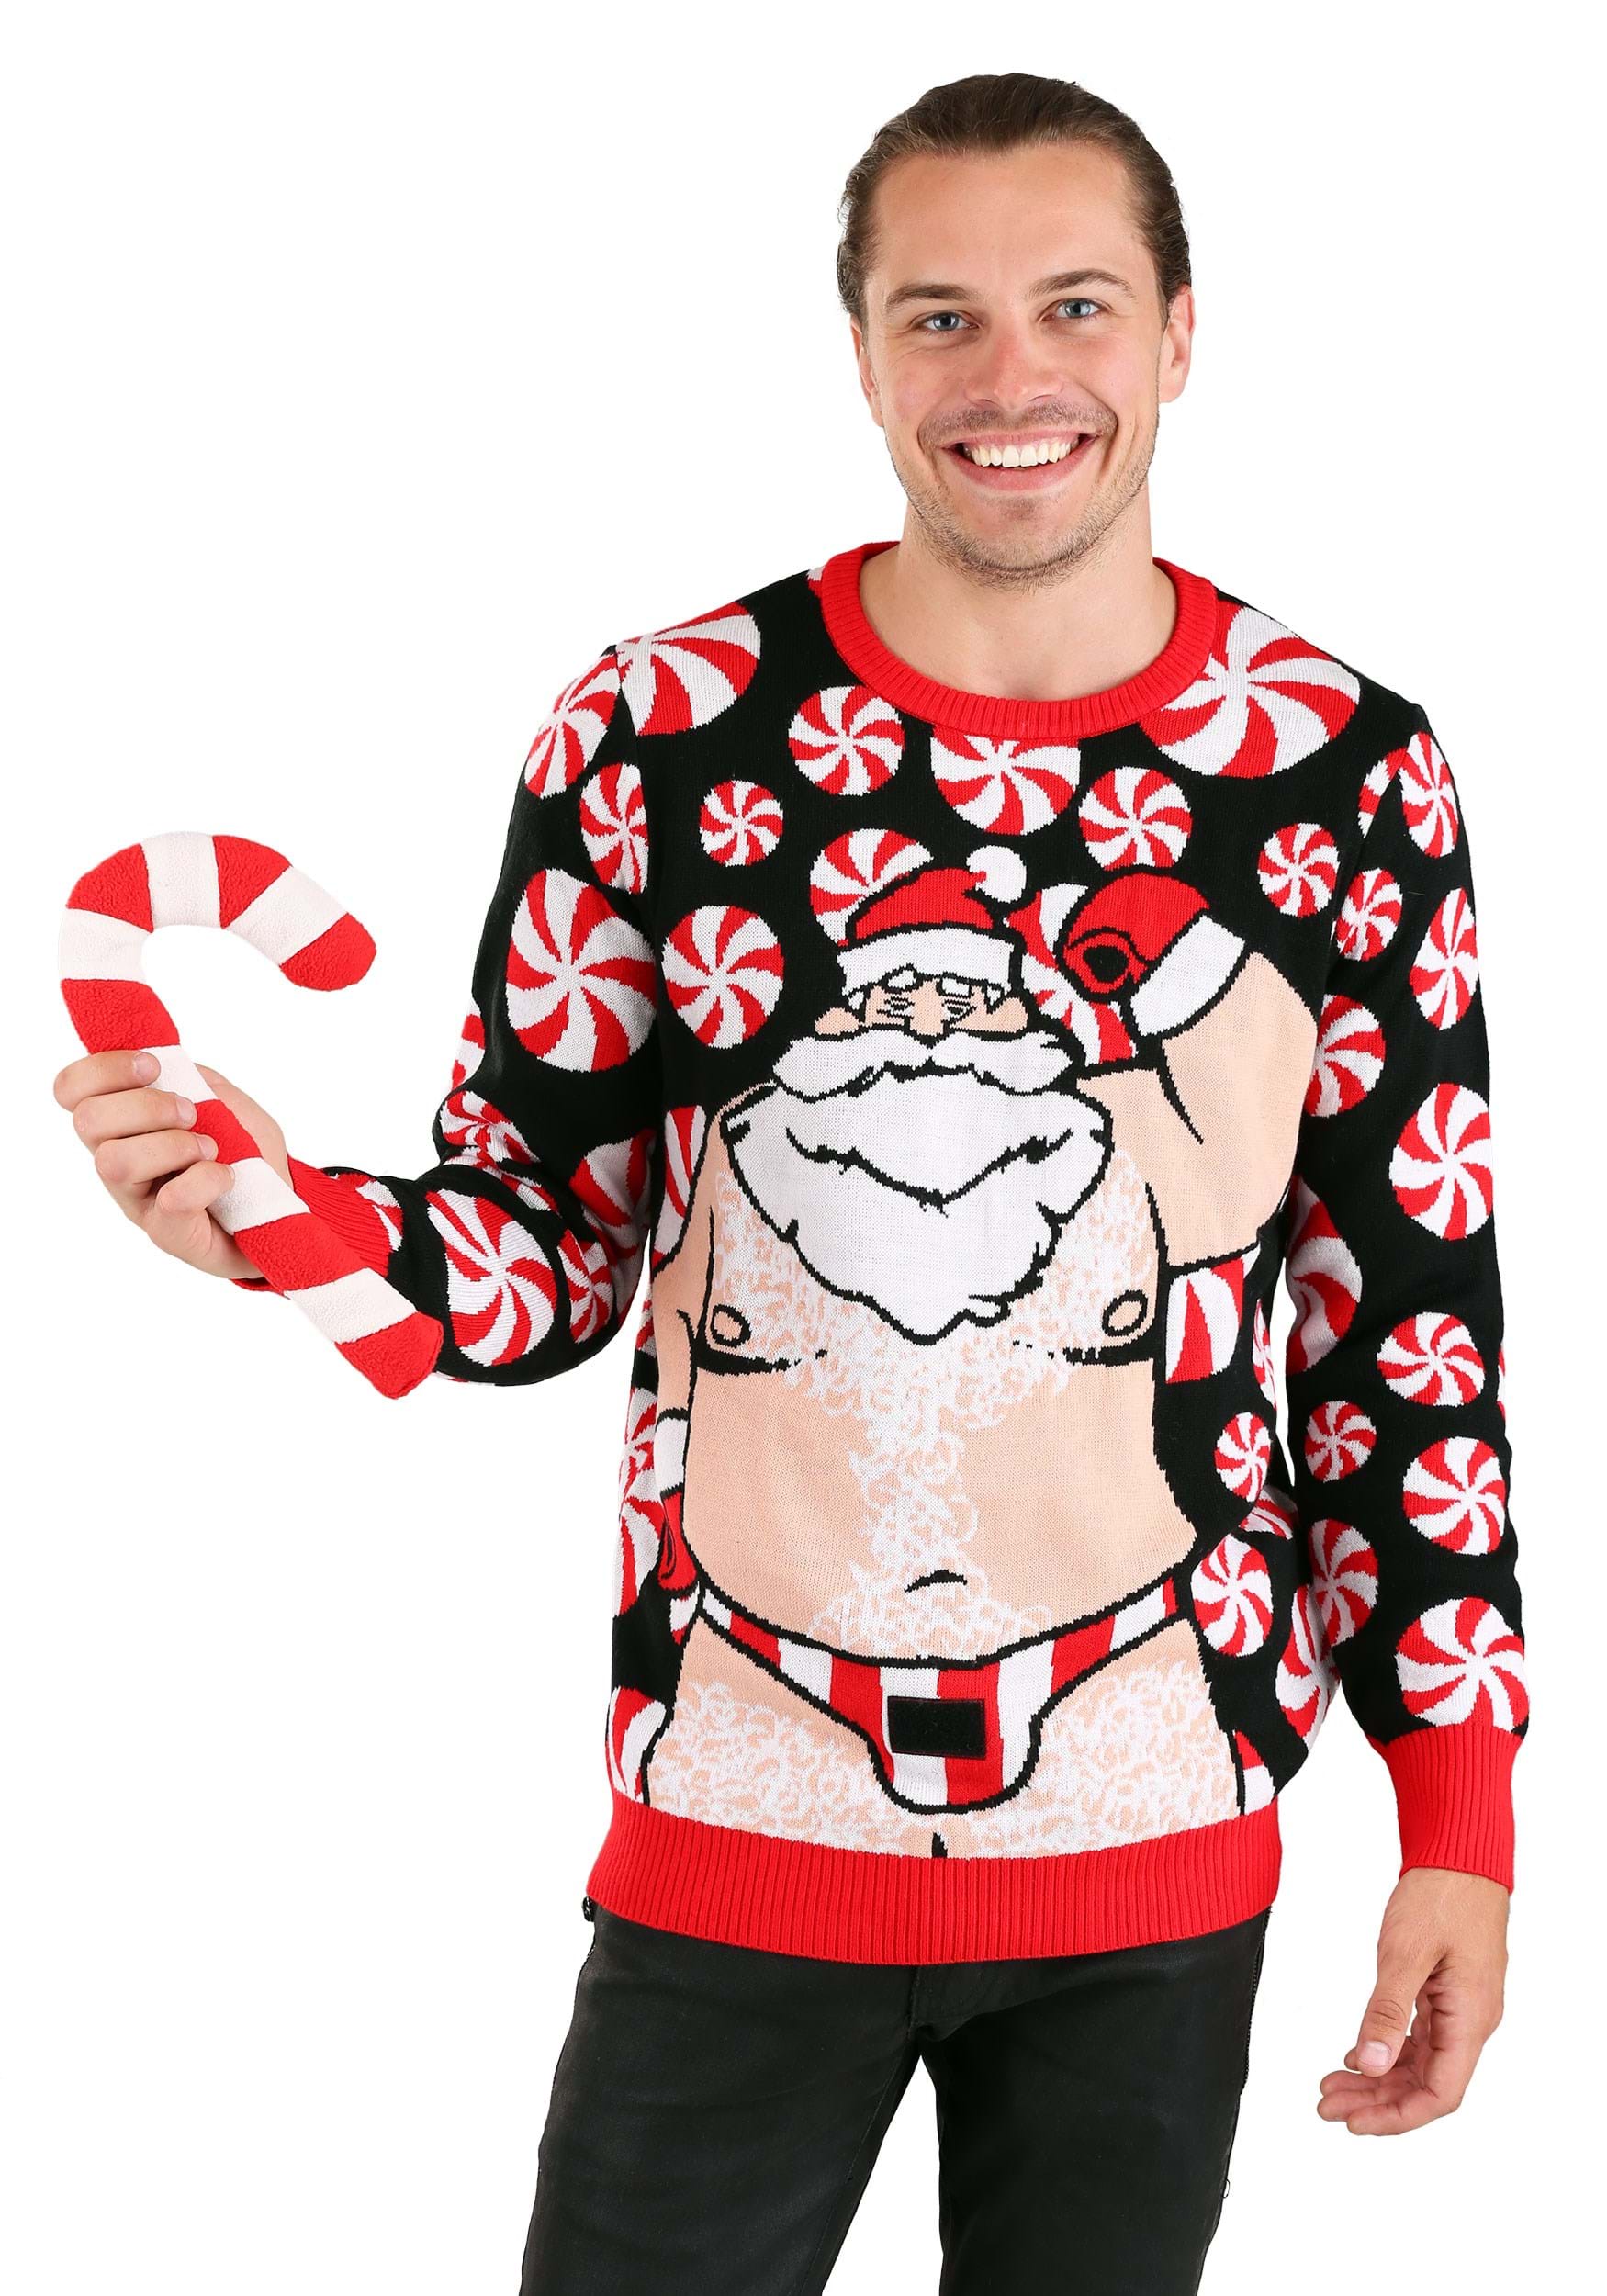 Photos - Fancy Dress Christmas FUN Wear Ugly  Sweater Santa Candy Cane Black/Red/White 